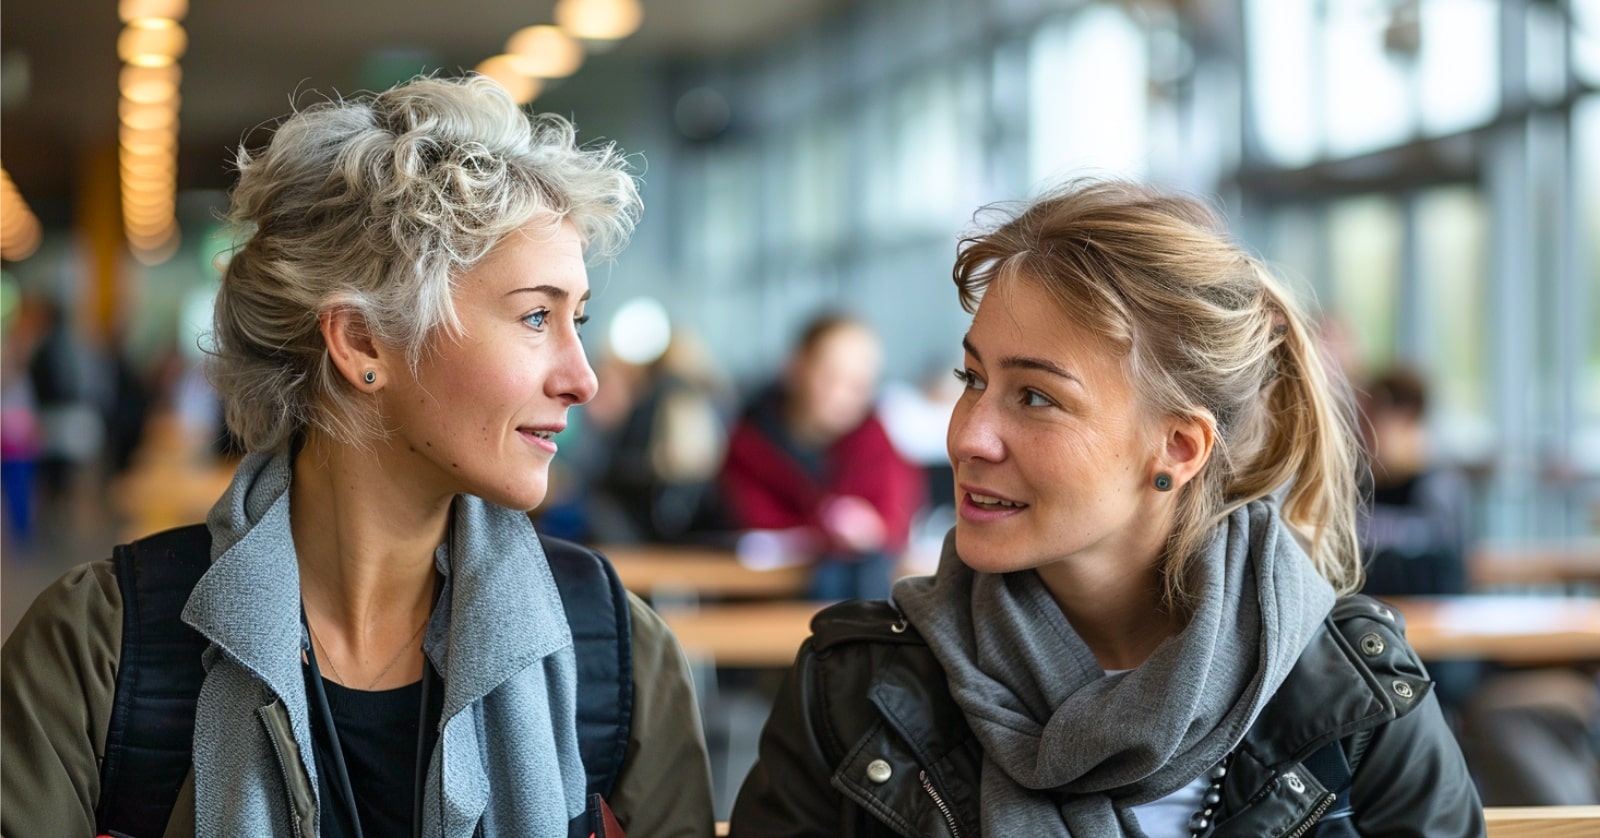 two women in conversation in a cafe setting, one listening intently while the other speaks